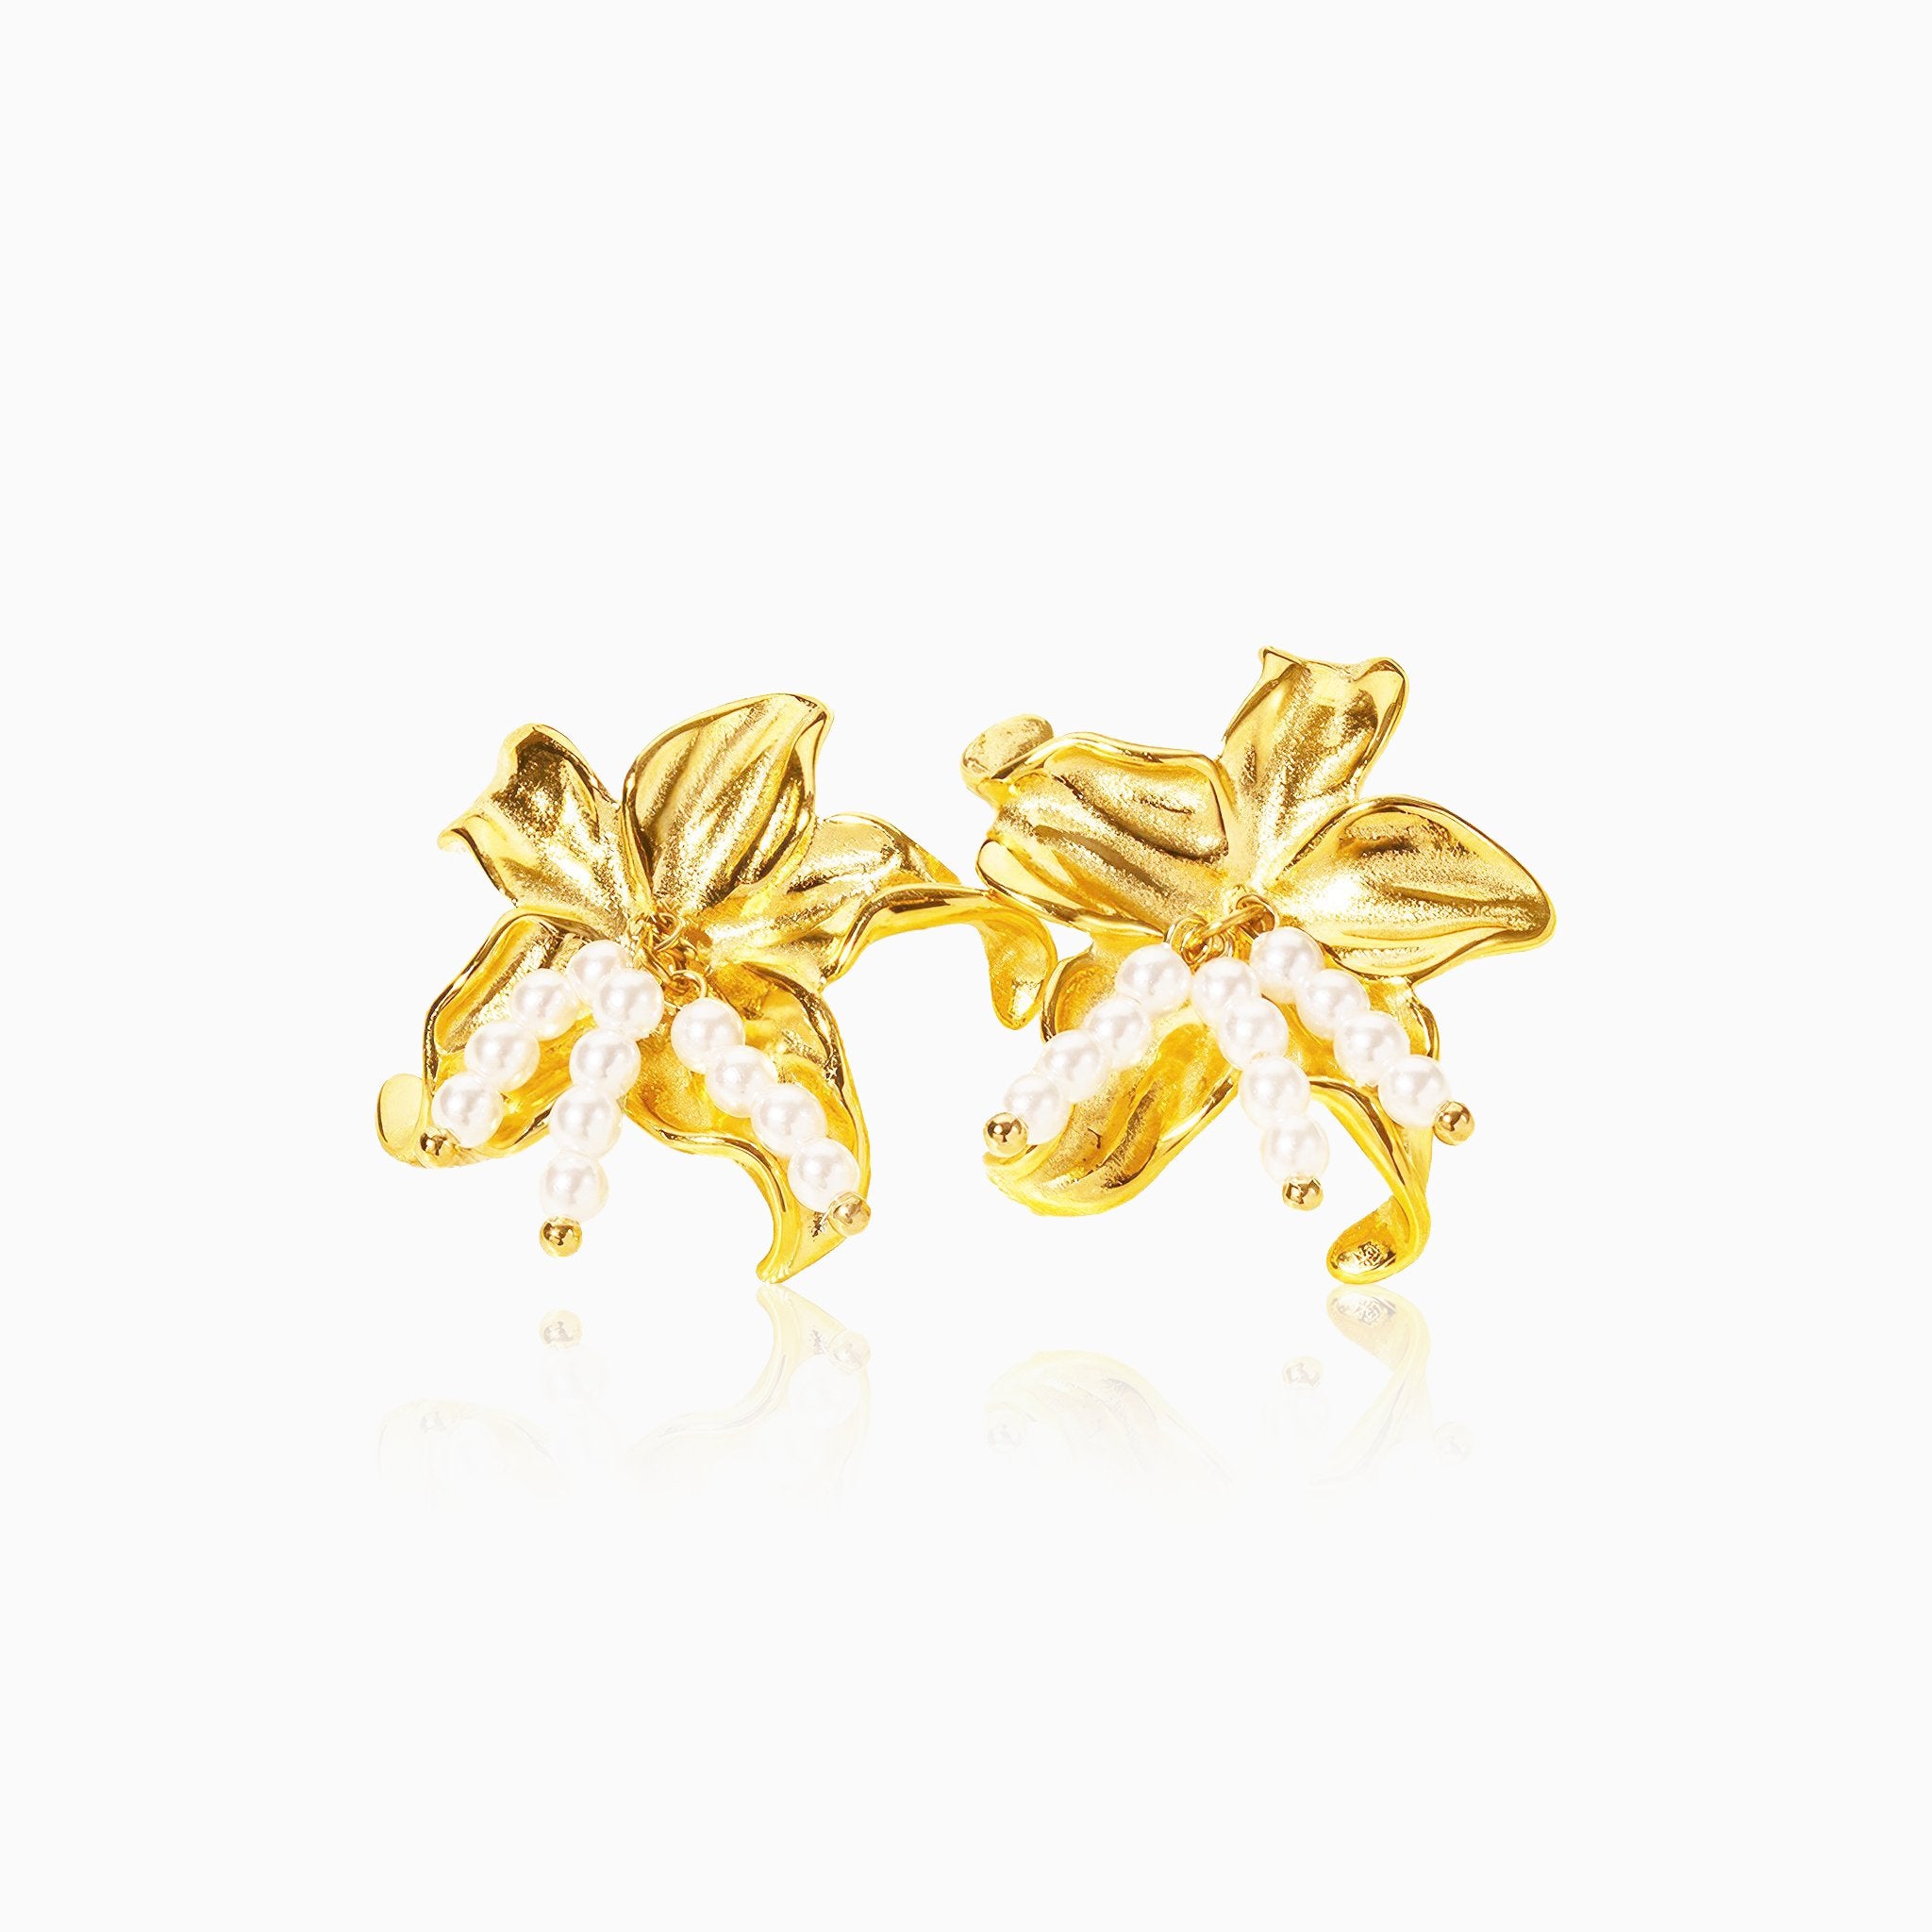 Starfish Earrings with Inlaid Pearls - Nobbier - Earrings - 18K Gold And Titanium PVD Coated Jewelry